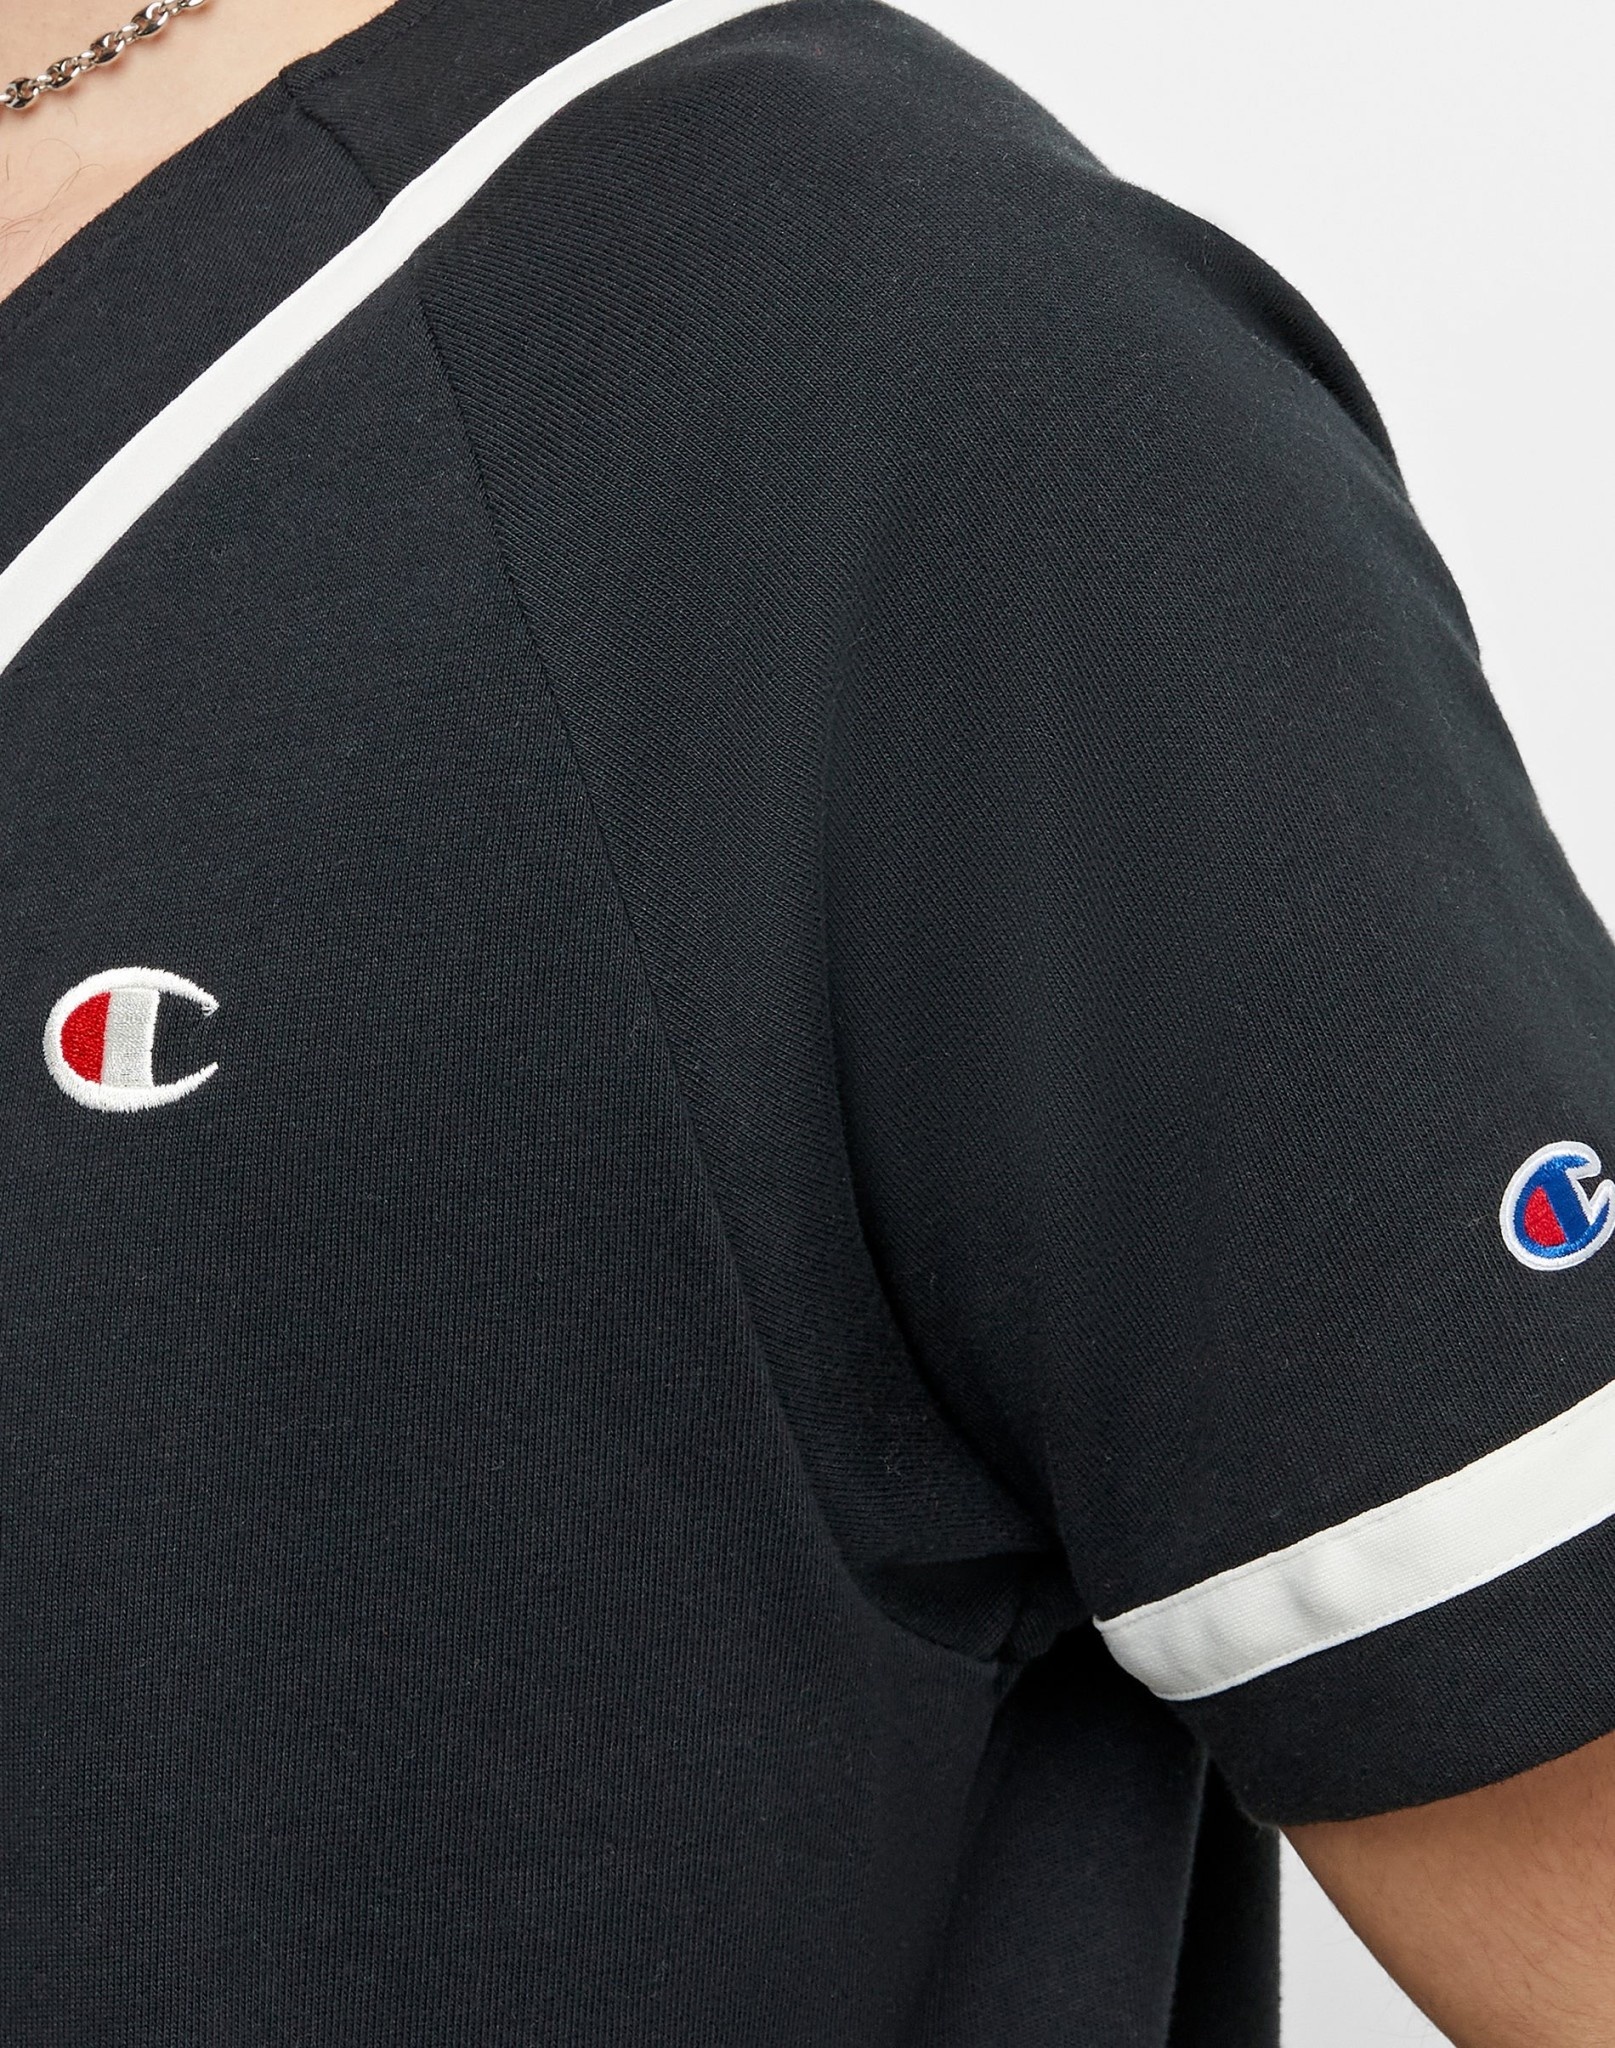 Buy Braided Baseball Jersey Men's Shirts from Champion. Find